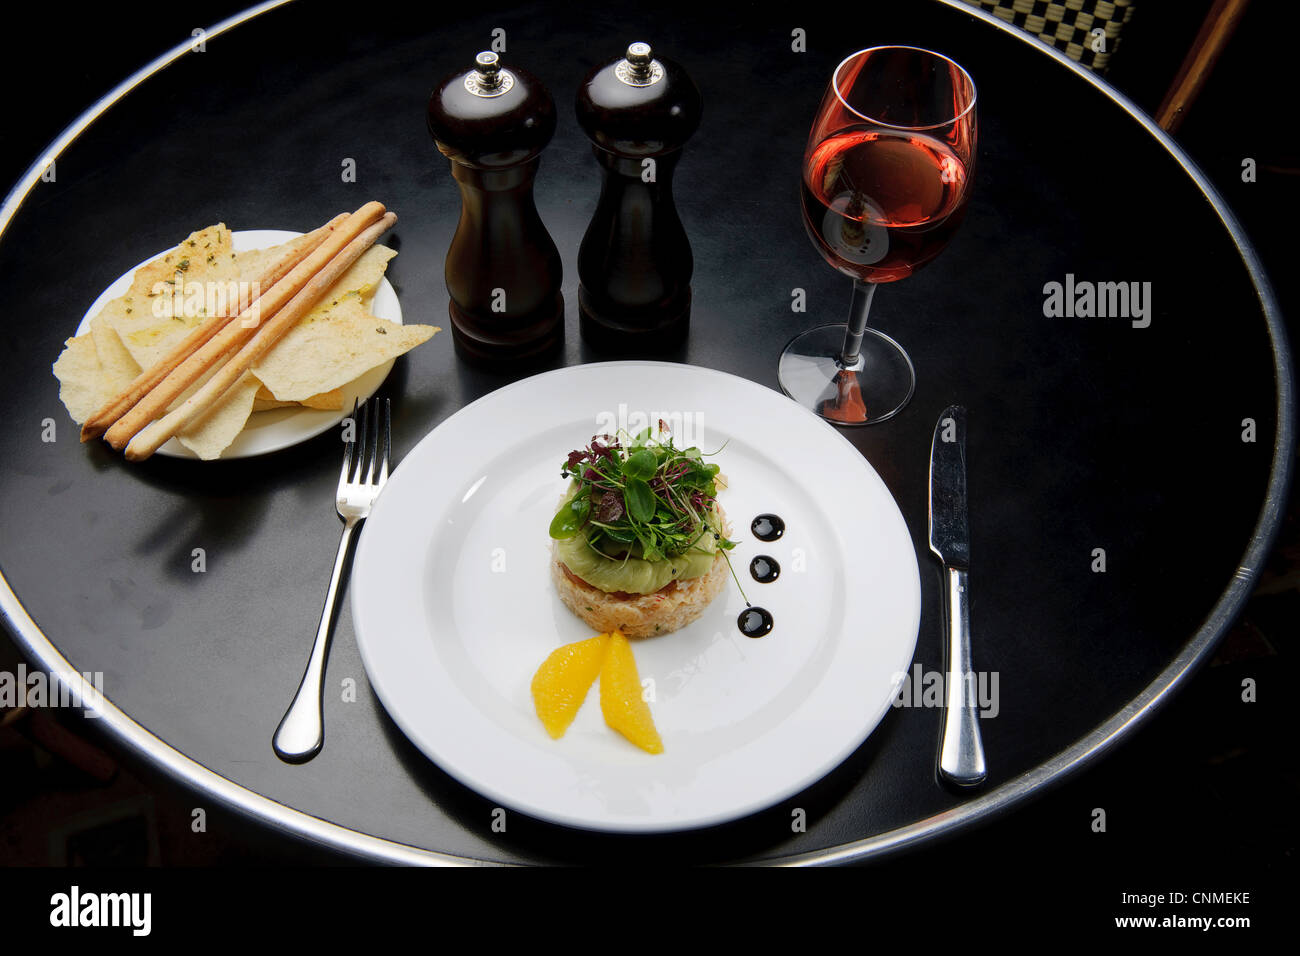 gourmet cuisine expensive restaurant food meal for one Stock Photo